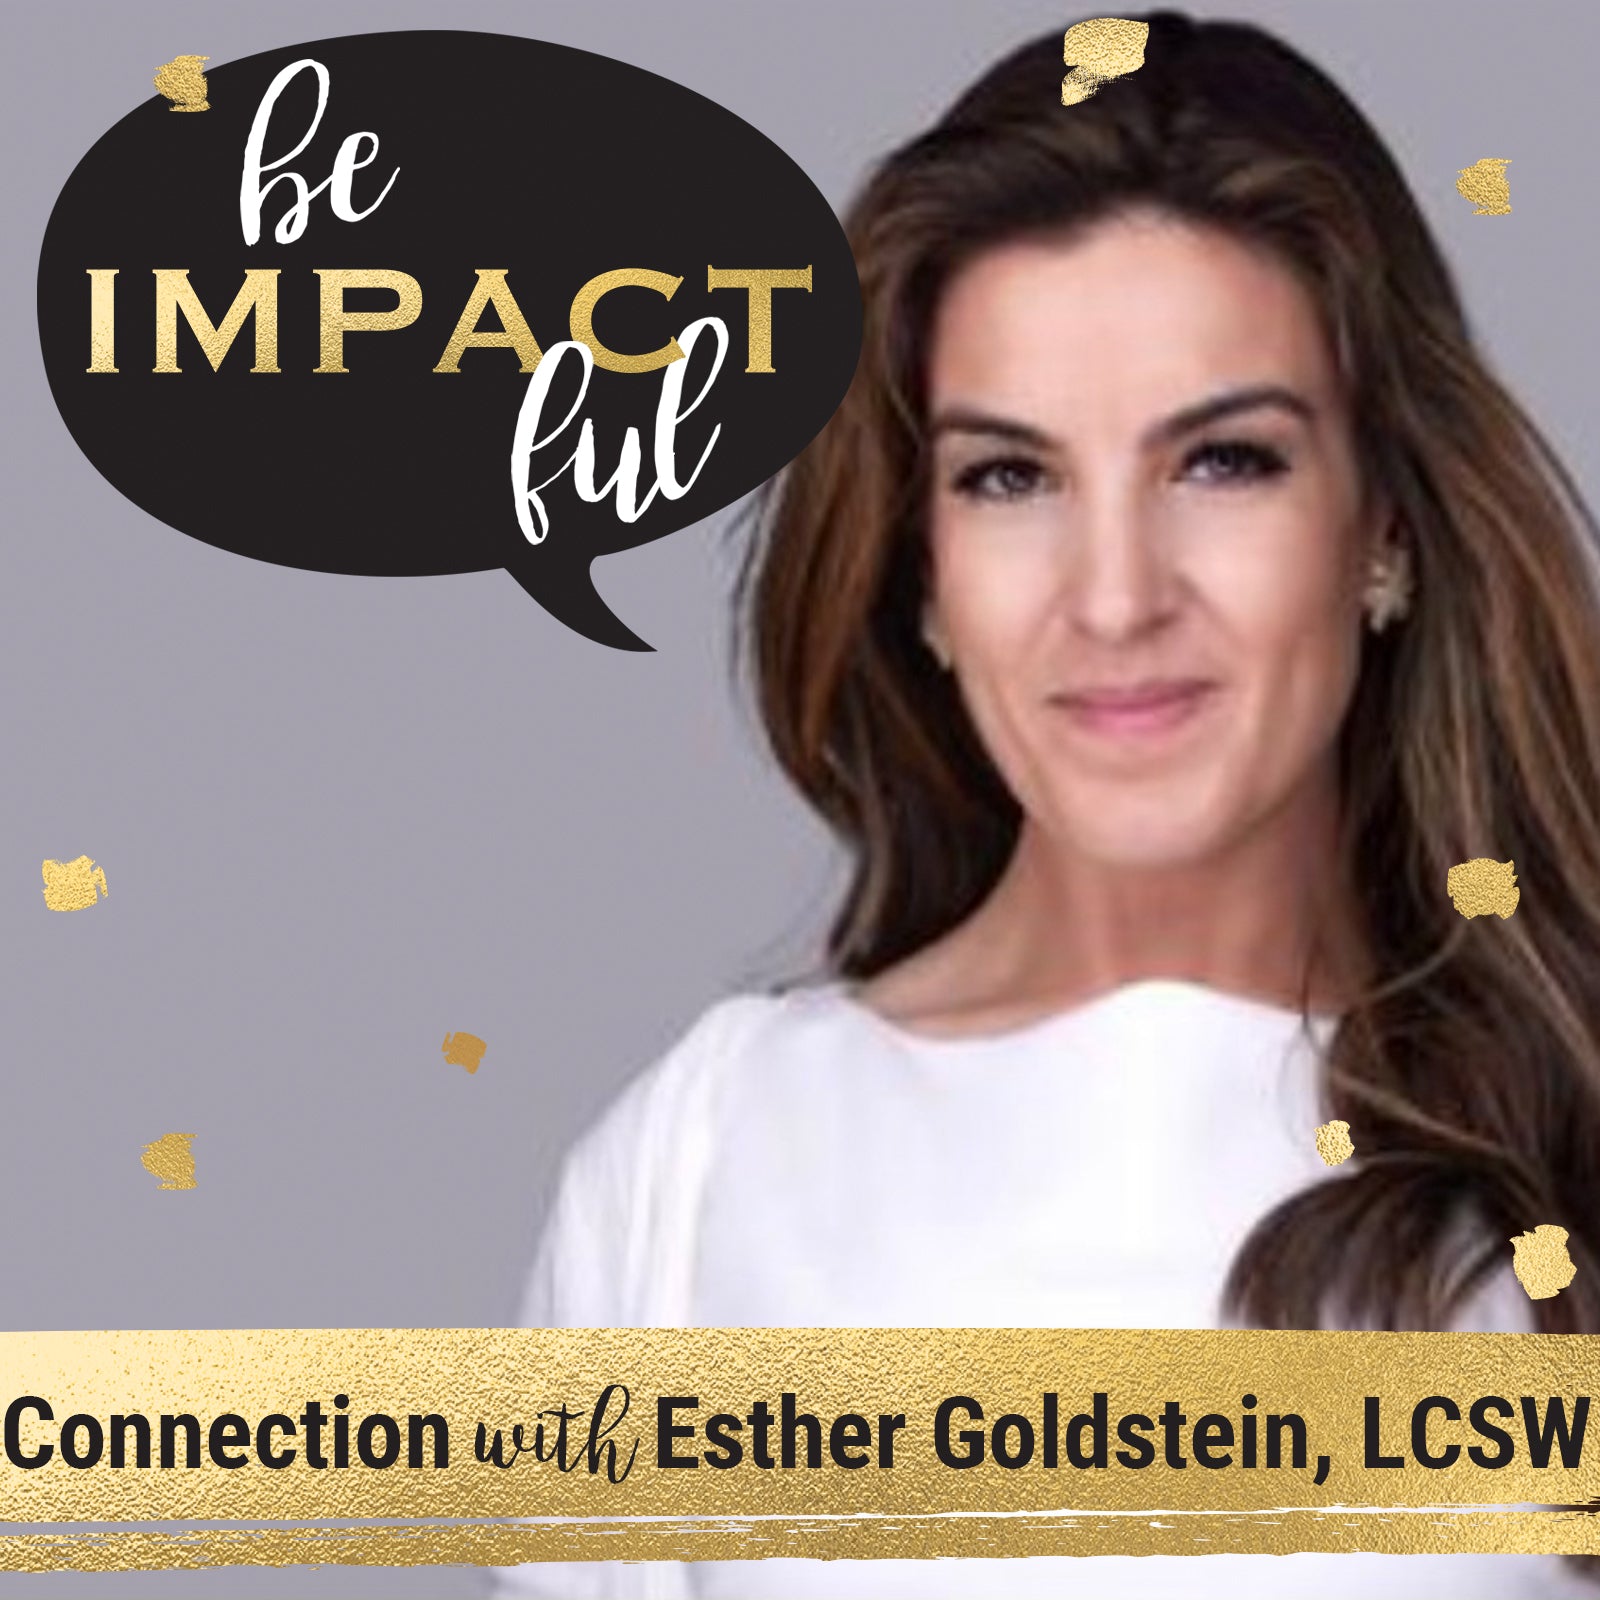 Connection with Esther Goldstein, LCSW